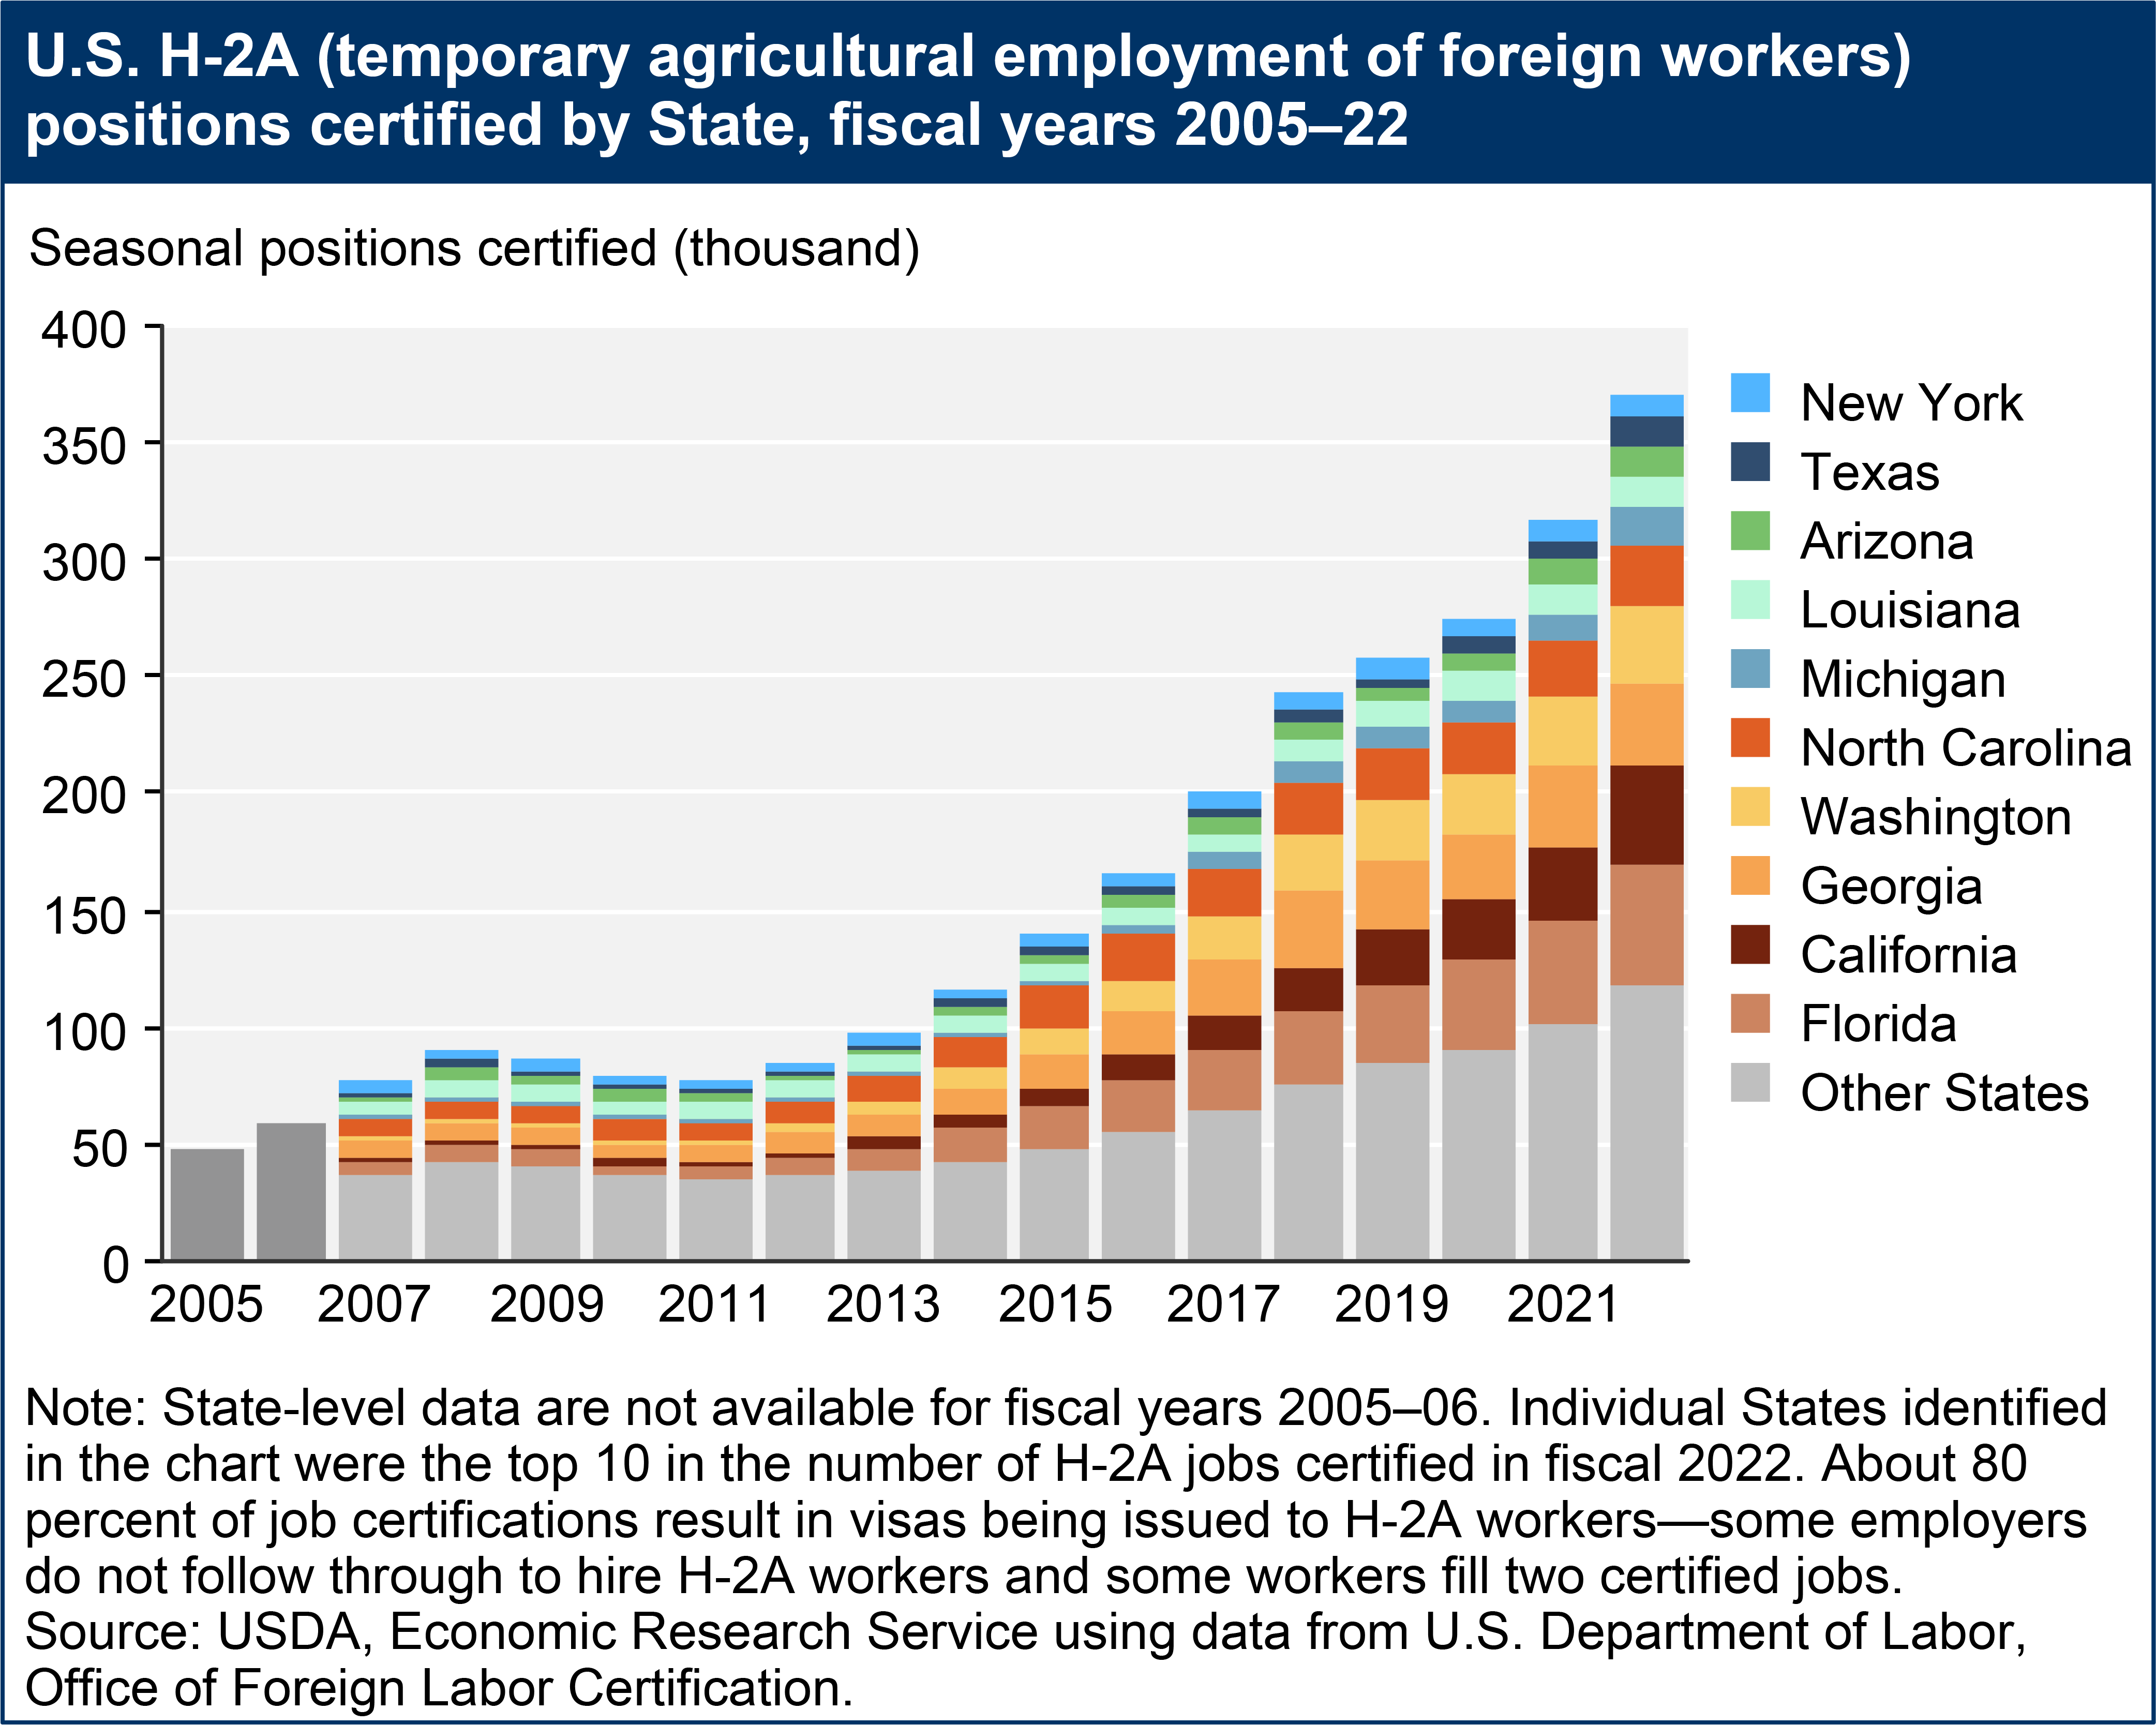 Truck Driving Jobs for Immigrants: Addressing the Labor Shortage